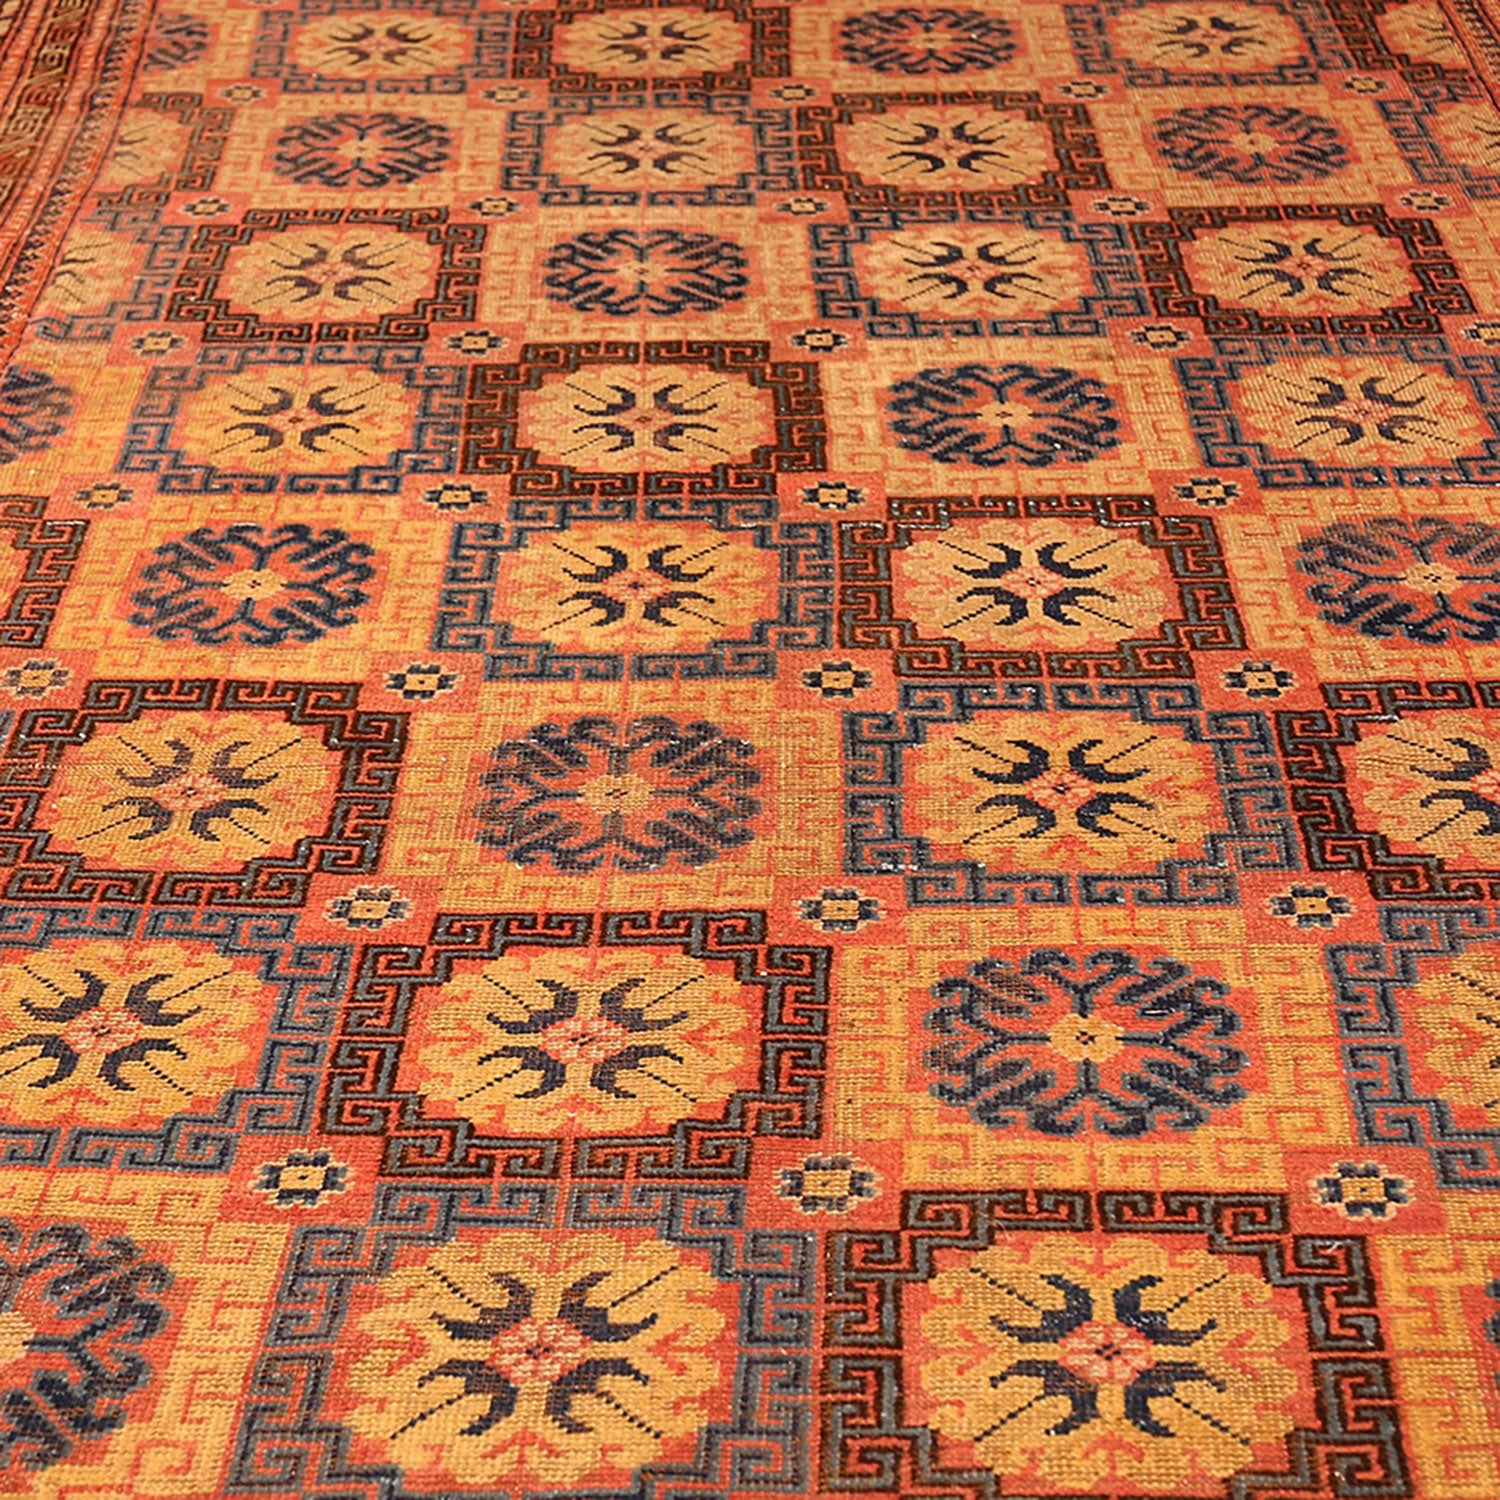 Intricate handwoven rug with geometric motifs in warm-toned colors.